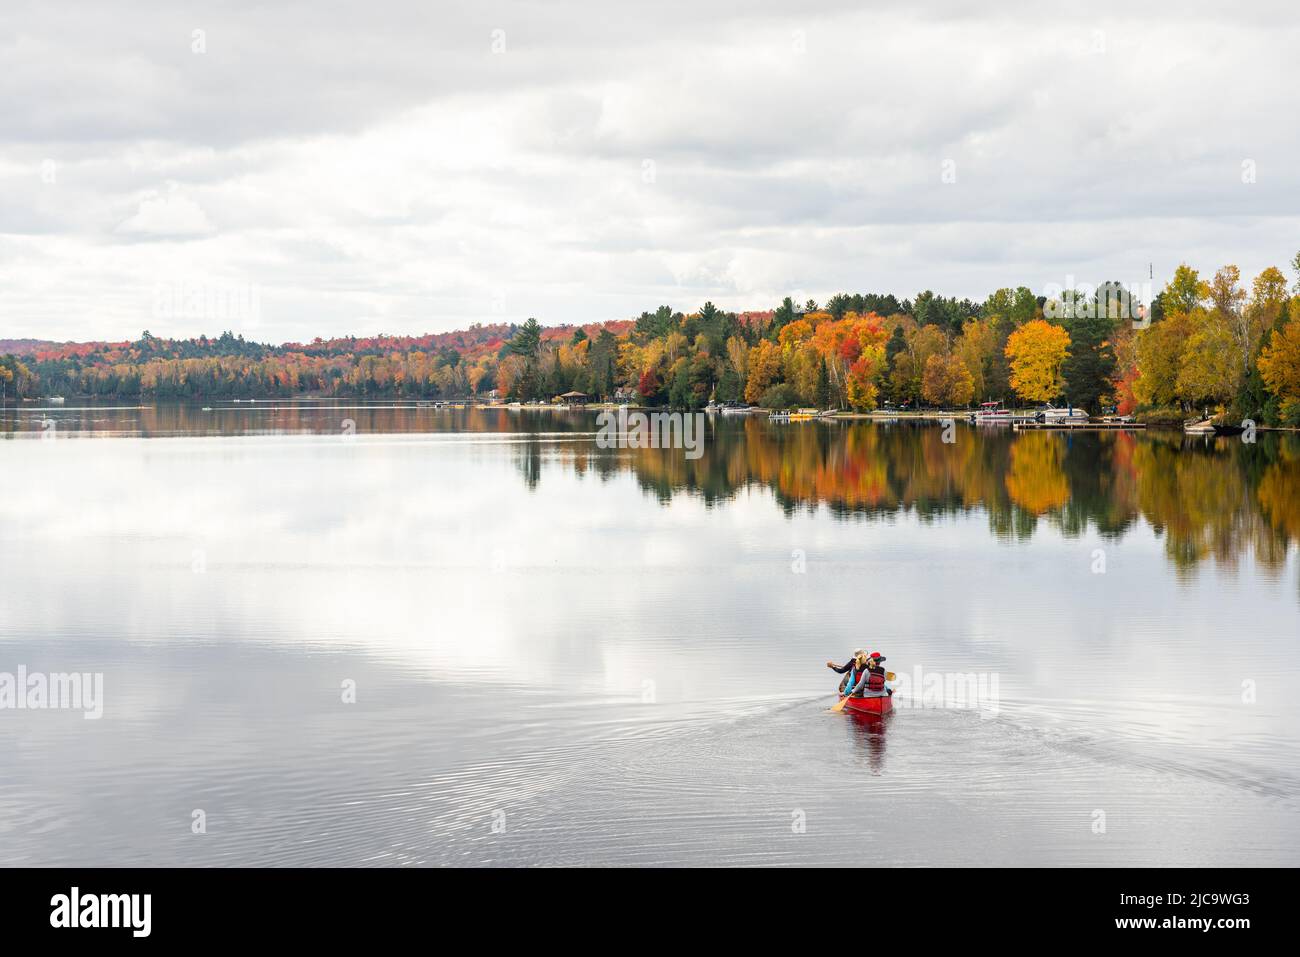 People canoeing on a beautiful lake surrounded by forest at the peak of fall foliage on a cloudy autumn day Stock Photo